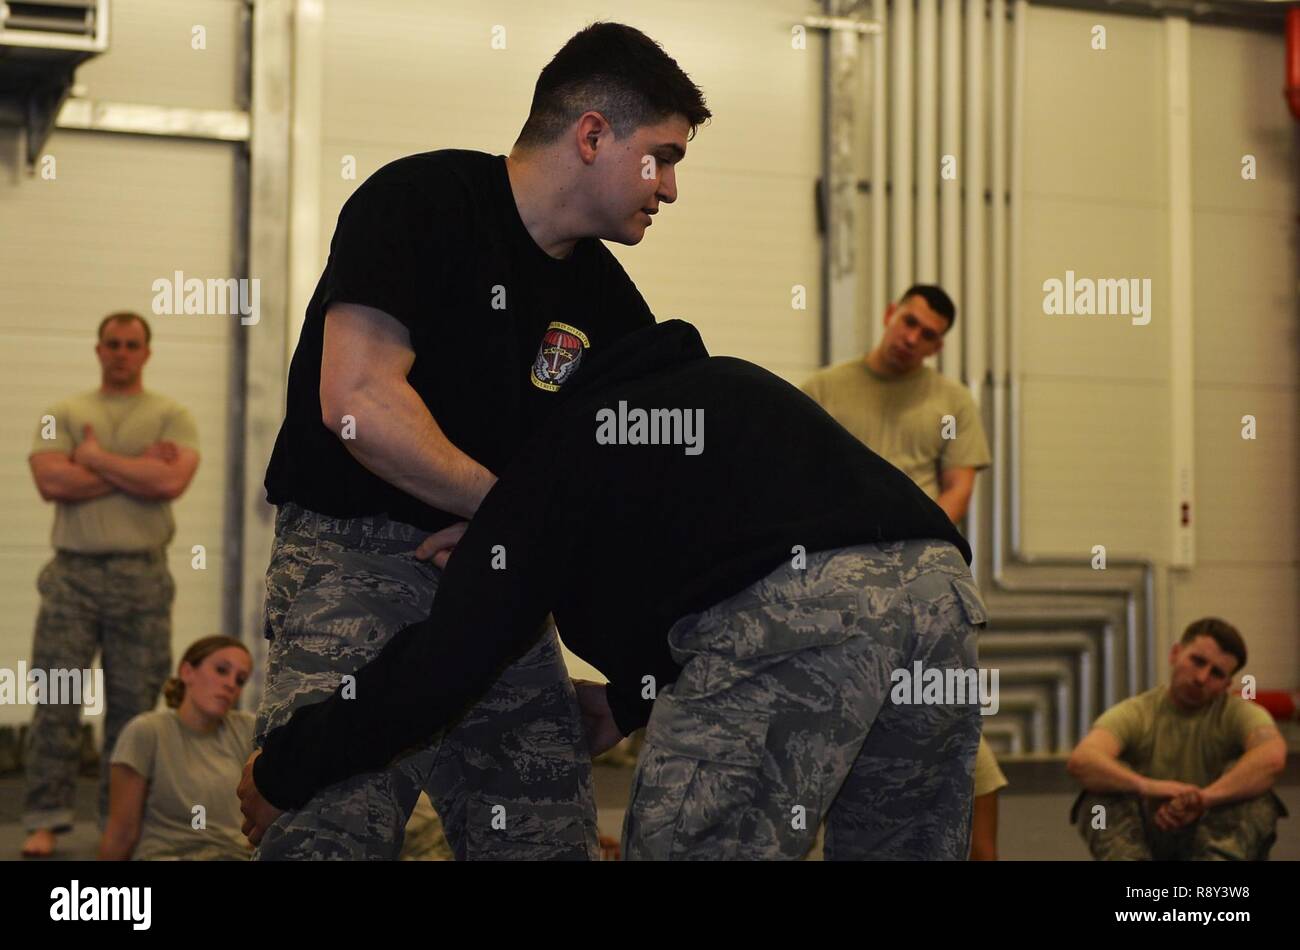 Staff Sgt. Jose Ruiz, 435th Security Forces Squadron ground combat readiness training center instructor, left, conducts a combatives class for Airmen from the 86th Security Forces Squadron and 569th U.S. Forces Police Squadron, on Ramstein Air Base, Germany, March 2, 2017. The 435th SFS conducts the Fly Away Security Training program for Airmen providing security for aircraft. FAST instructors aim to help prepare security forces Airmen for scenarios they may face while on a mission. Stock Photo